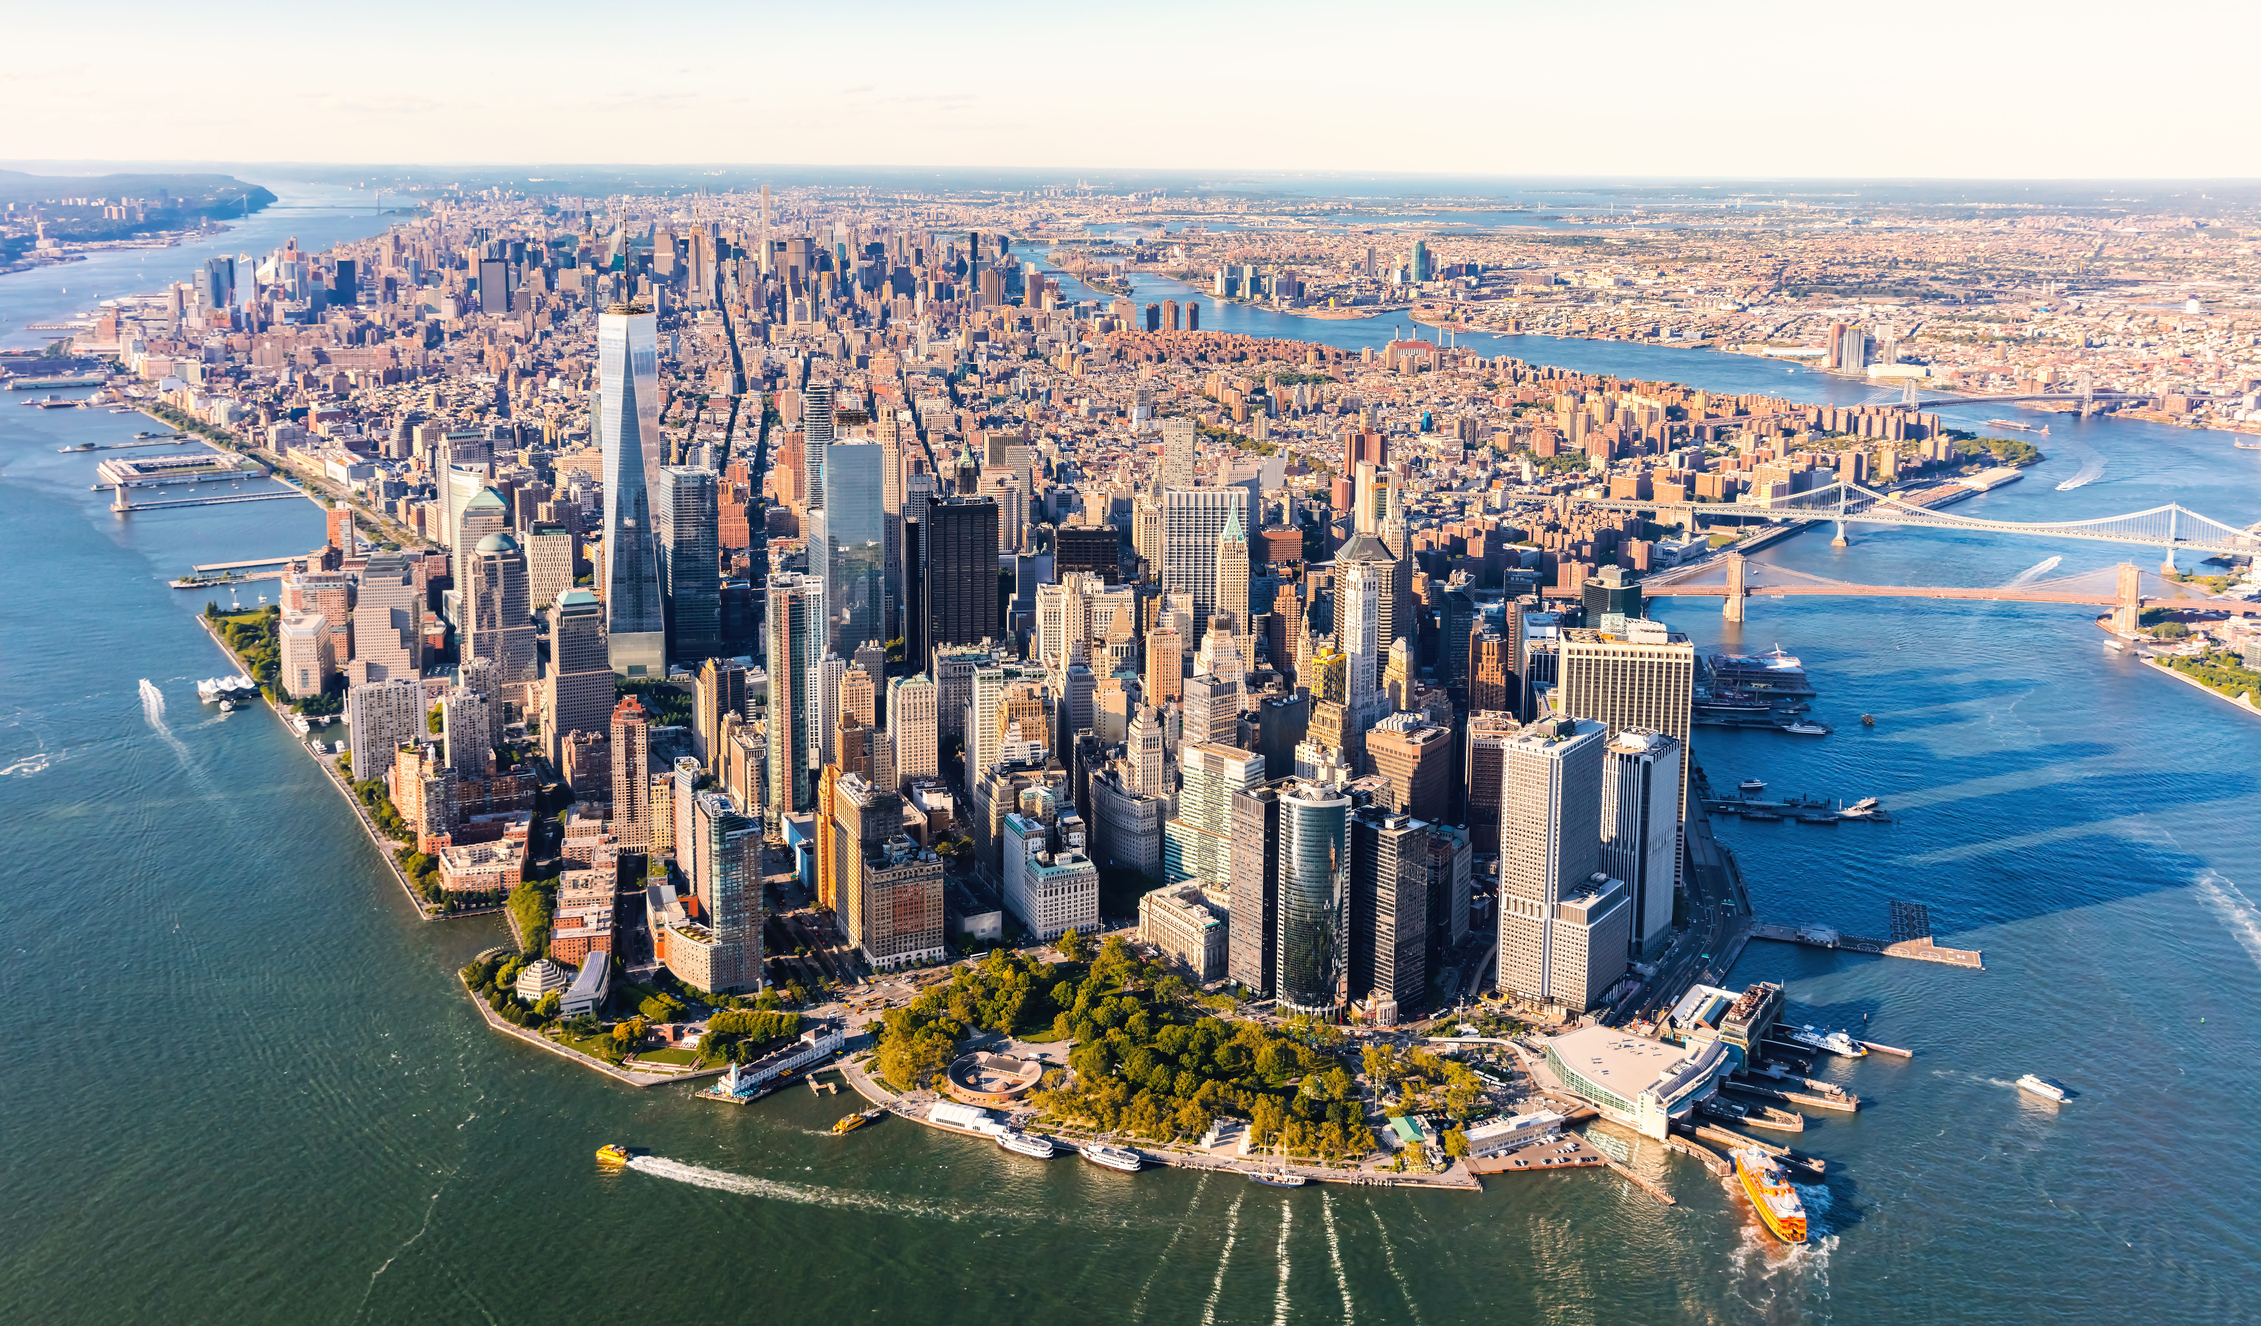 In Manhattan average daily room rates were up for the sixth consecutive month as of Q2 2018 helping promote growth in reven